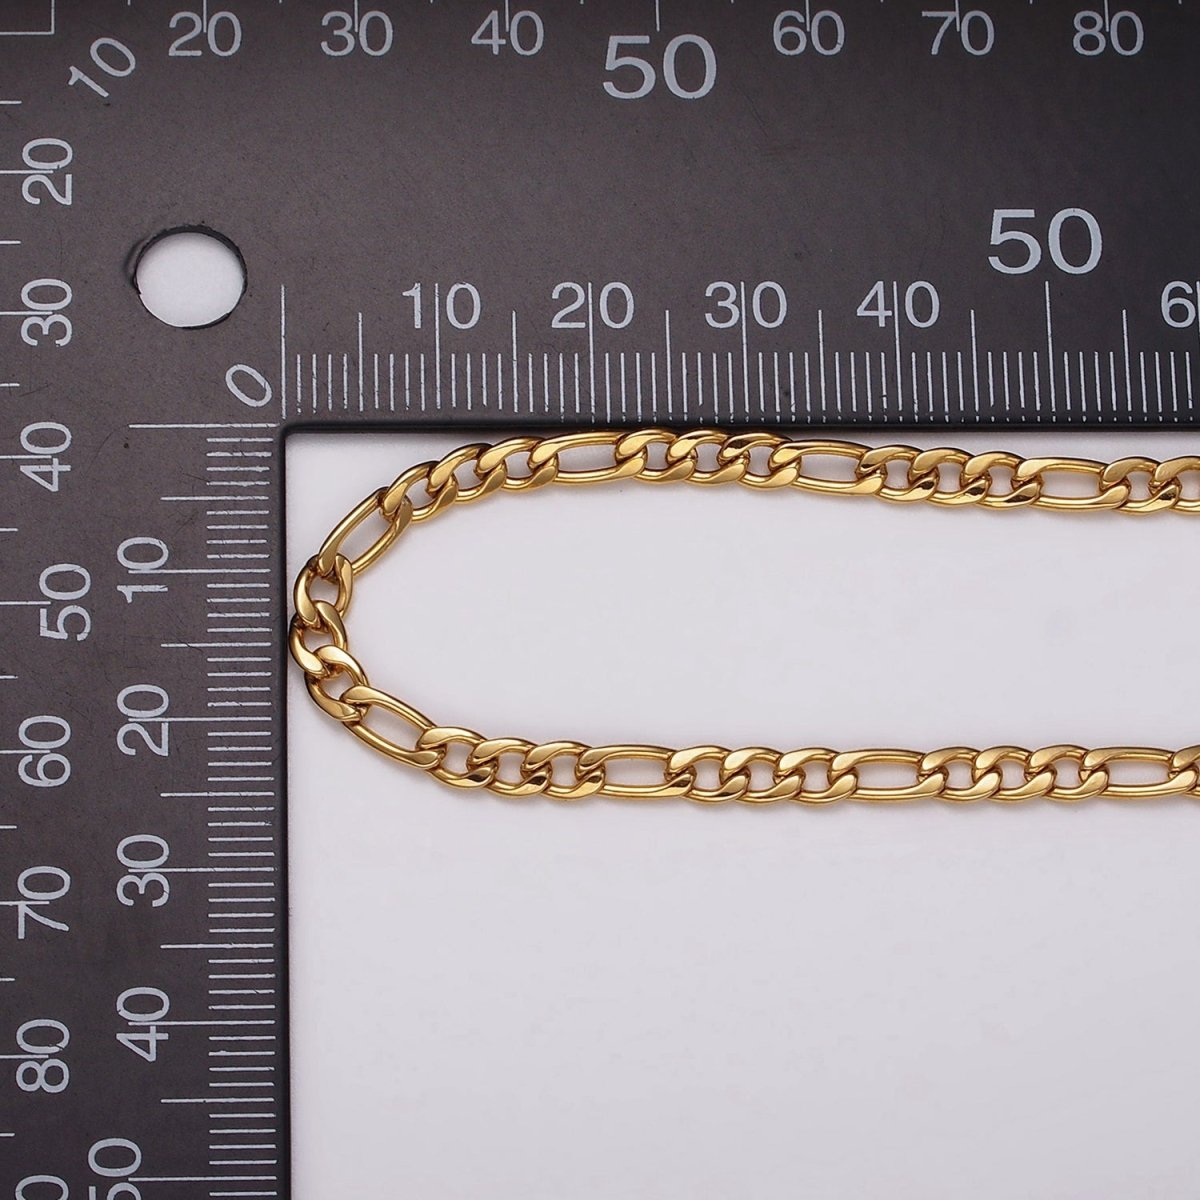 24k Gold Filled 3.8mm Width Figaro Chain Unfinished Chain by Yard Chain Bulk Wholesale | ROLL-1492 - DLUXCA